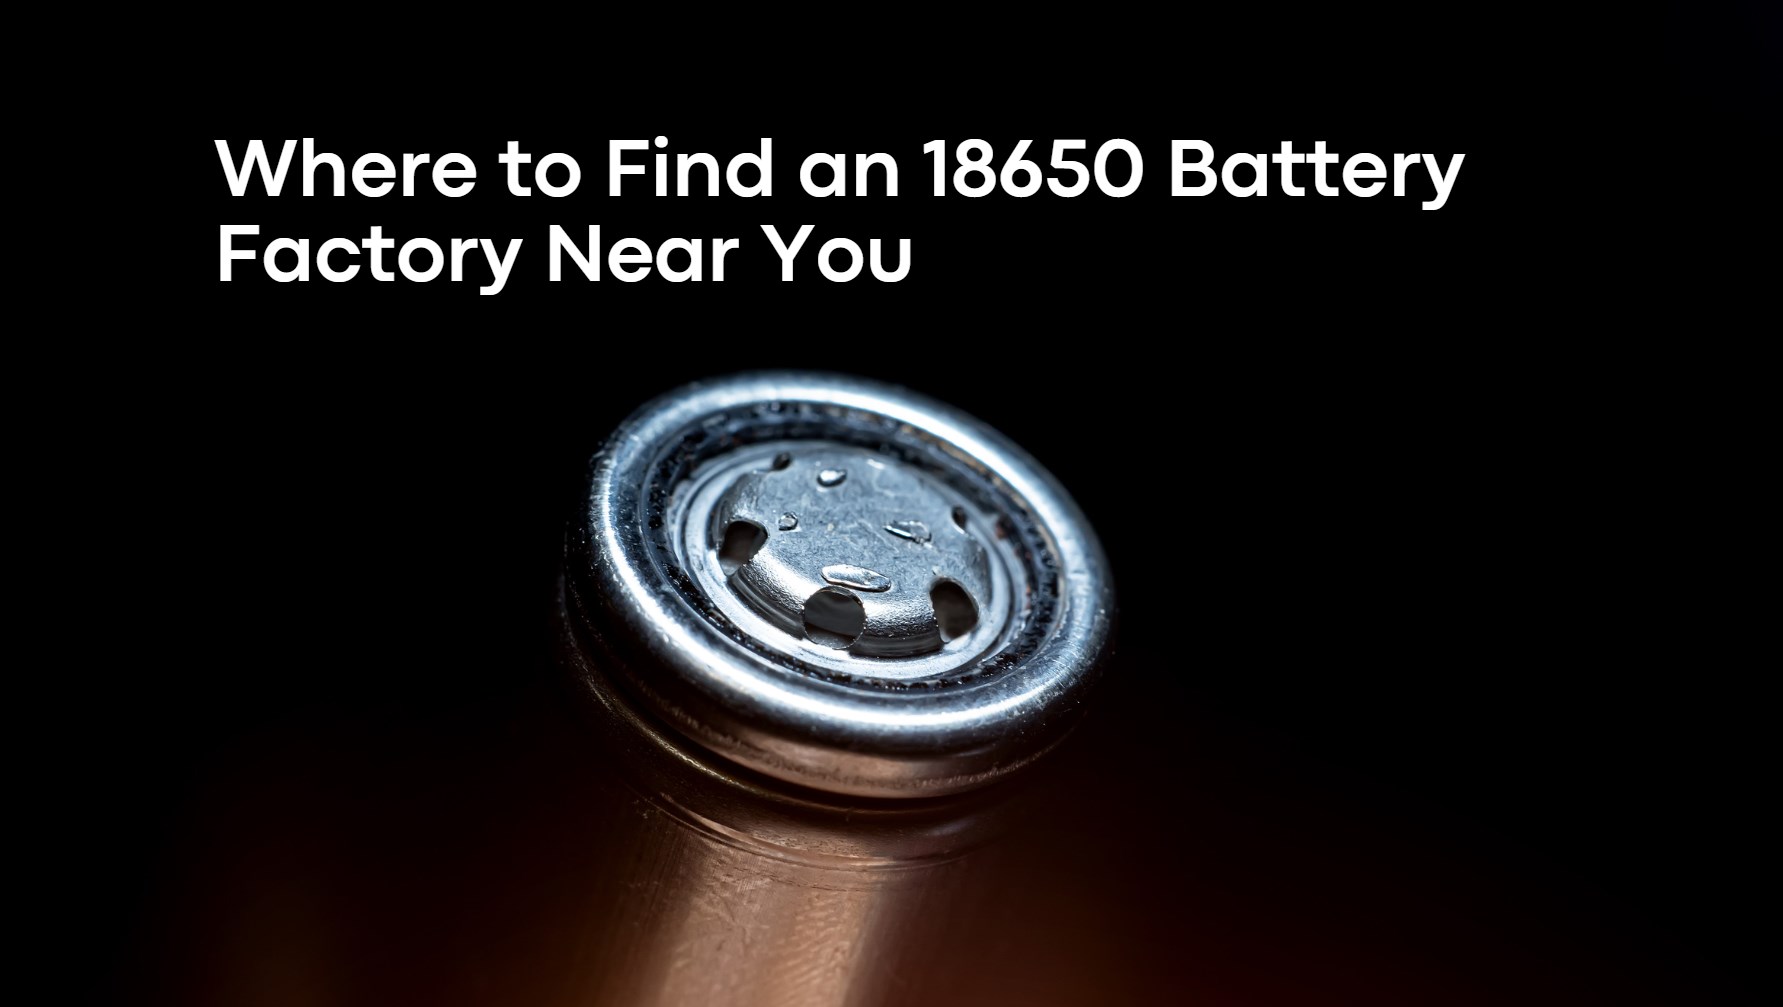 Where to Find an 18650 Battery Factory Near You